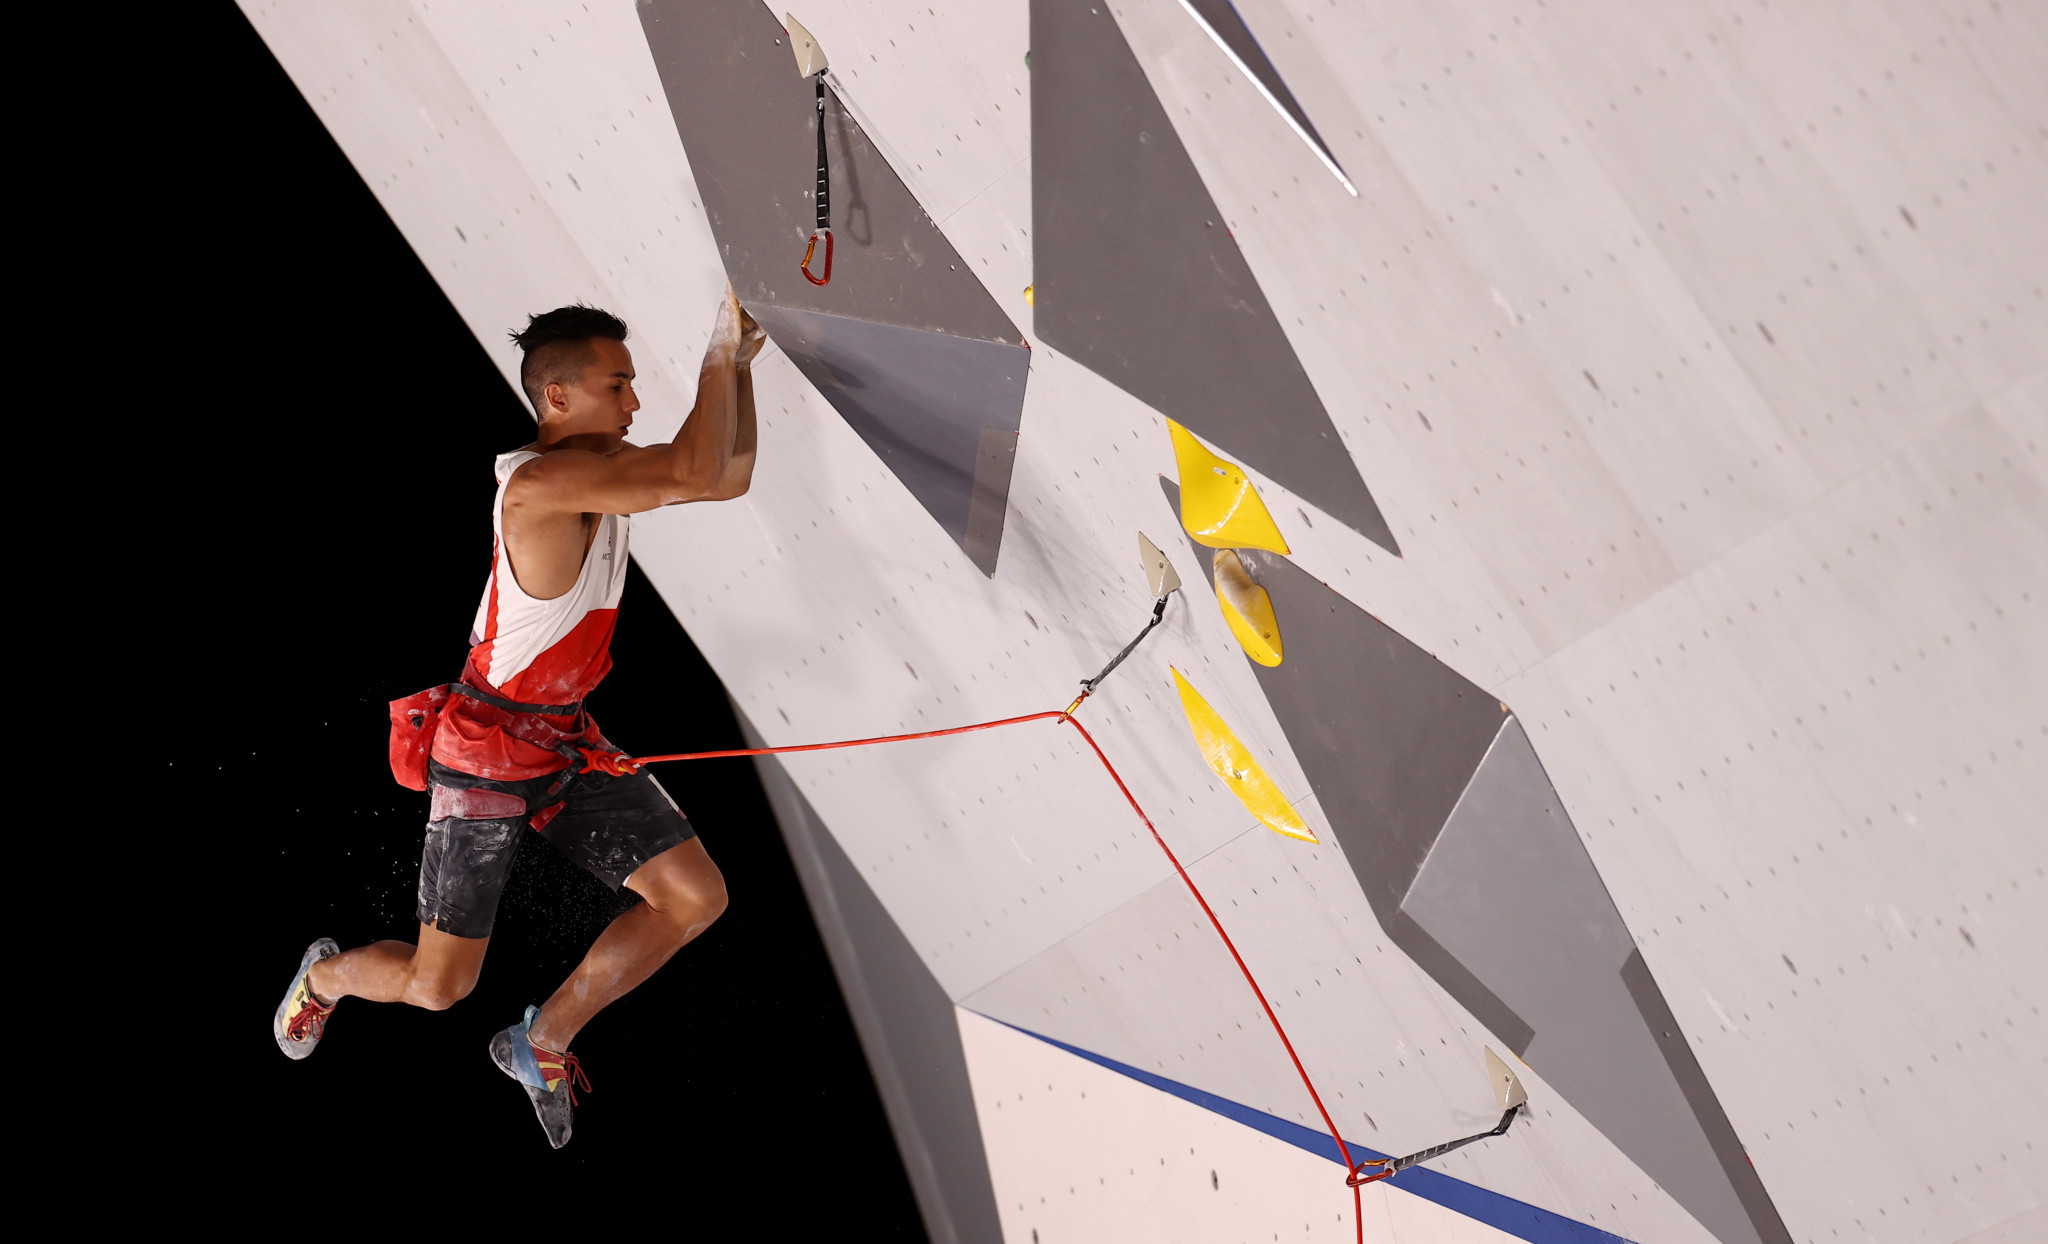 Paris 2024 quota places on the line as 18th IFSC World Championships set to begin in Bern